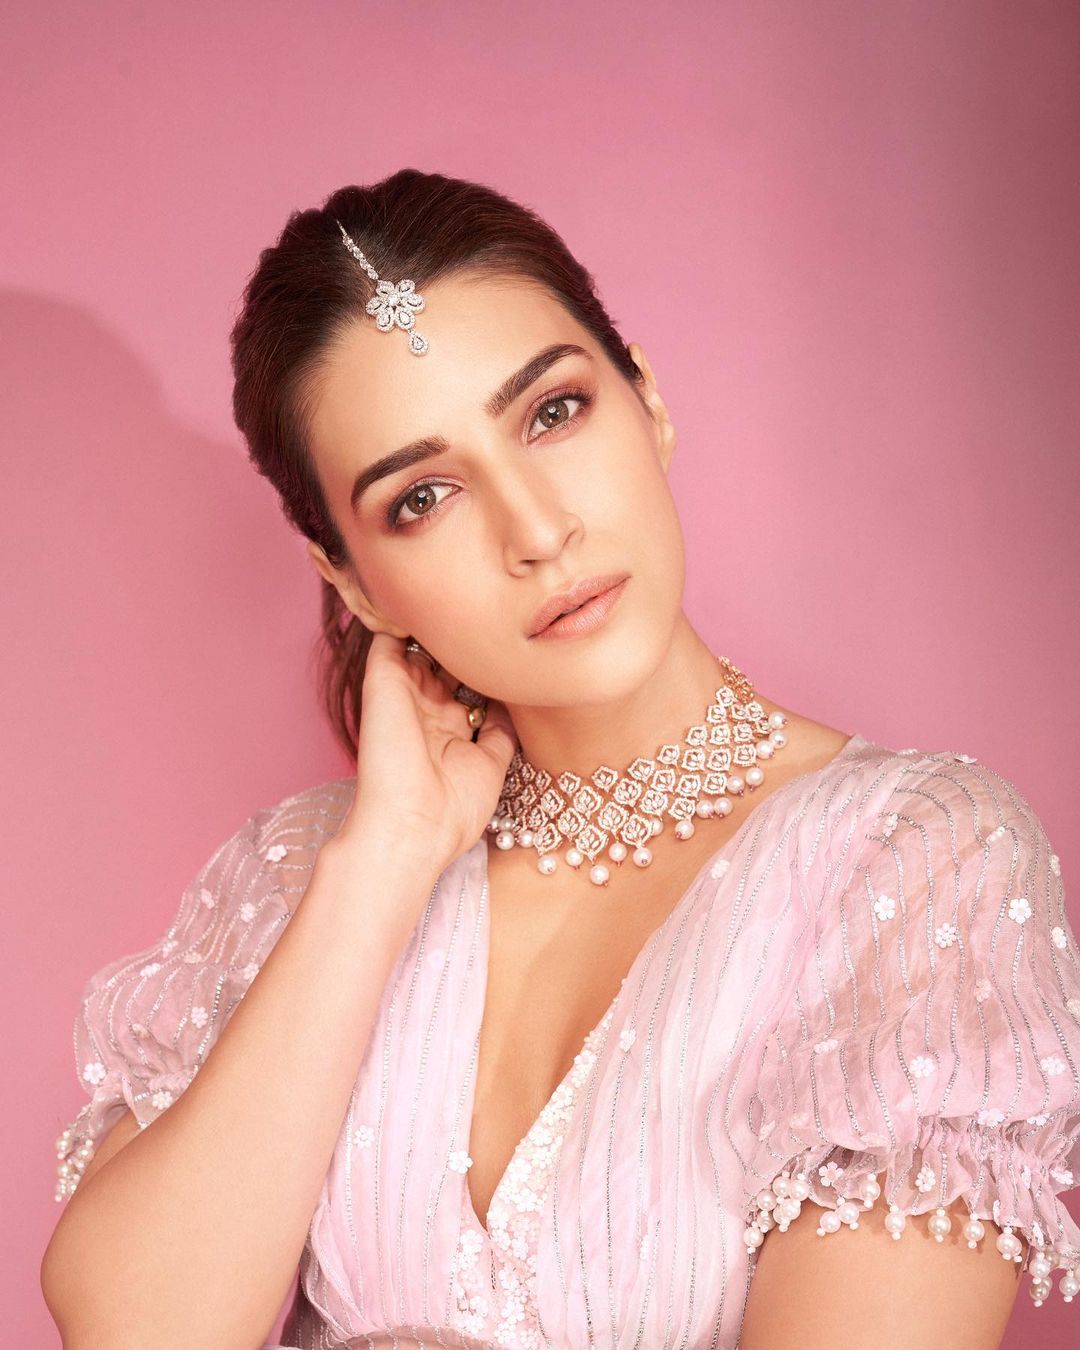 Pink Is Kriti Sanon’s Colour As She Makes A Classy Statement In A Rosy Shivan & Narresh Sharara